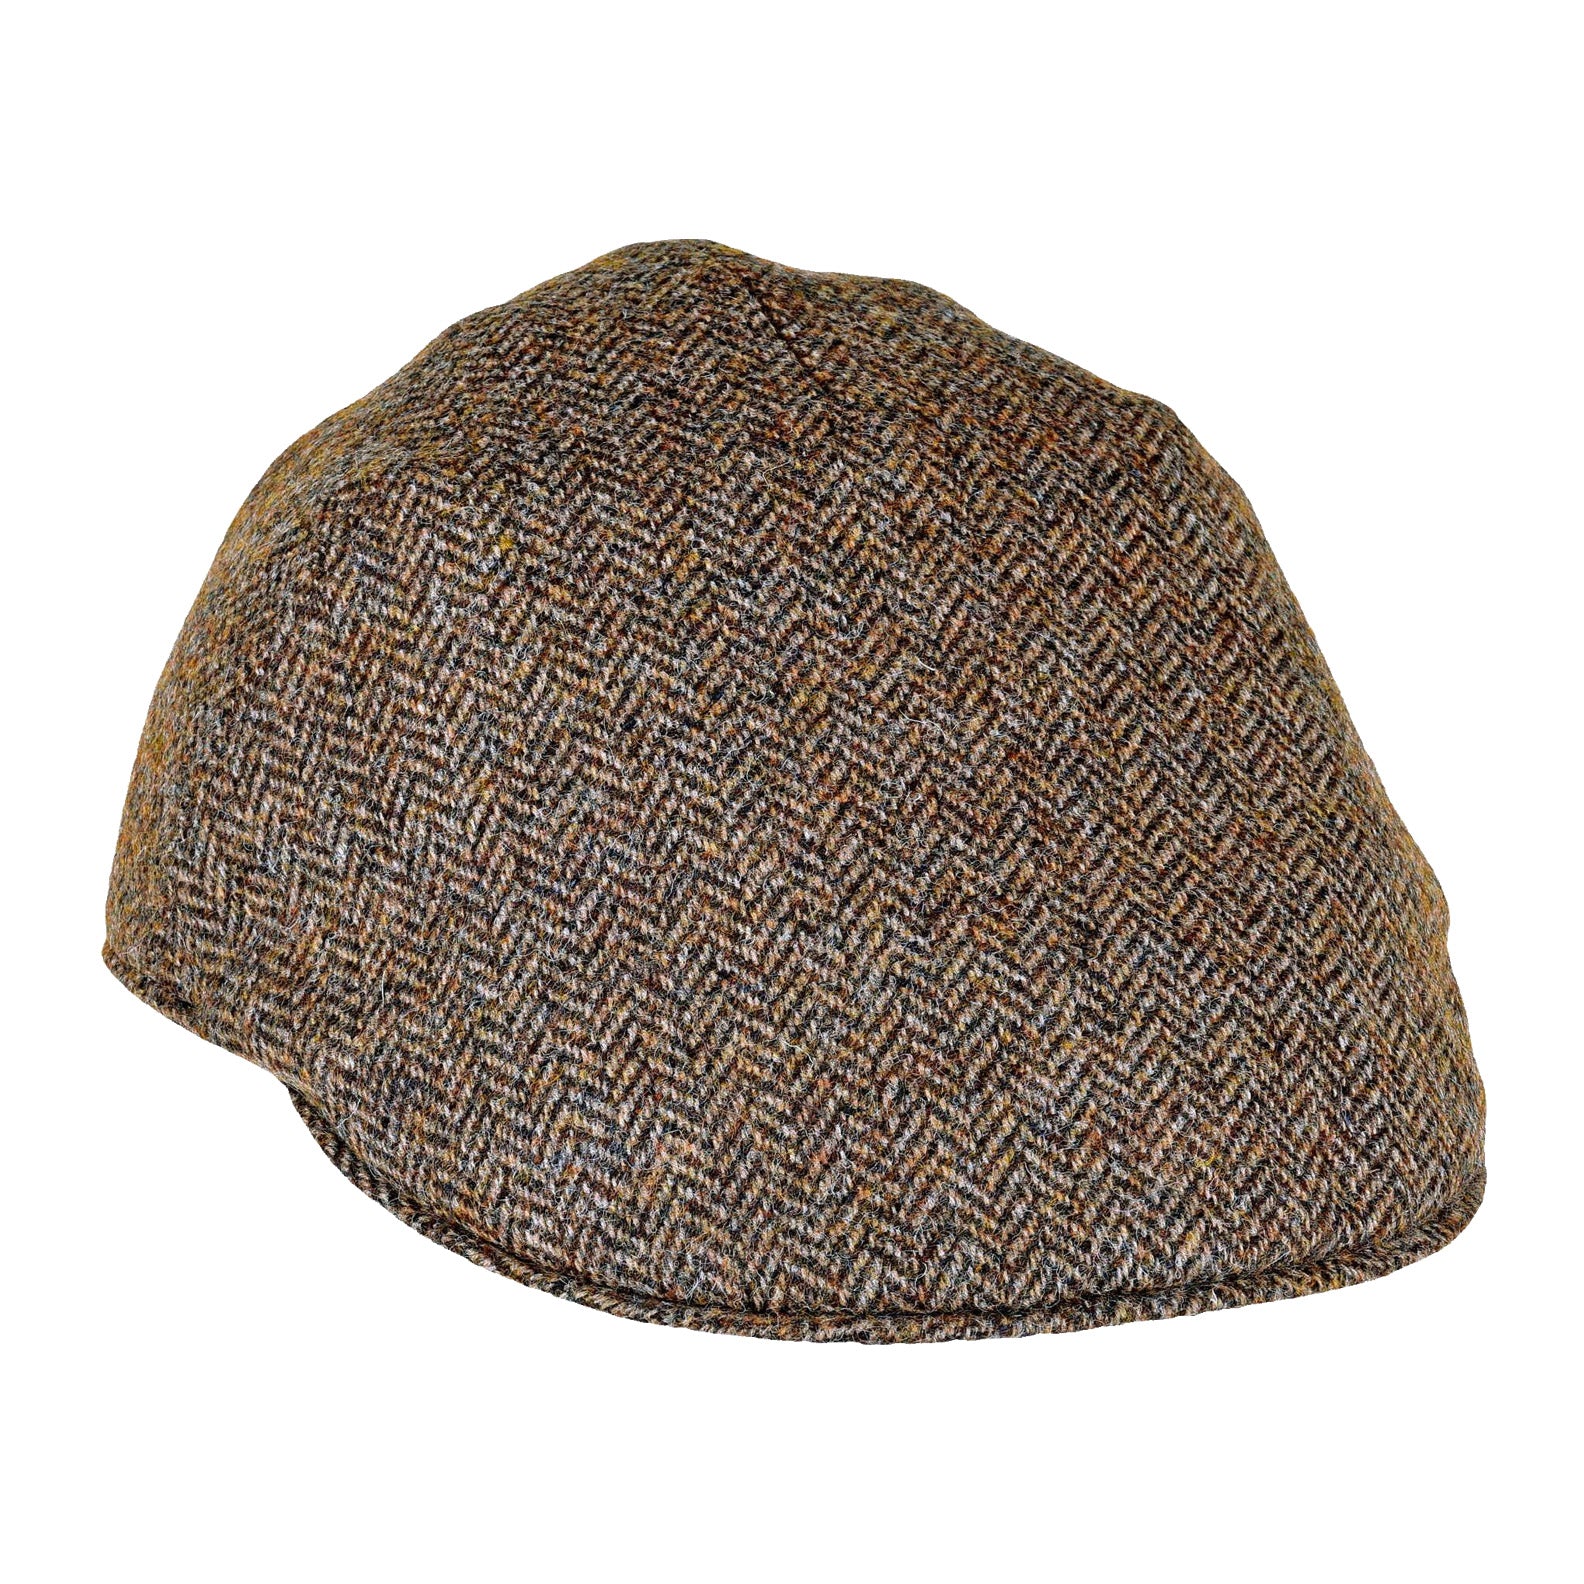 Heather Exeter British Tweed Duckbill cap – New Forest Clothing